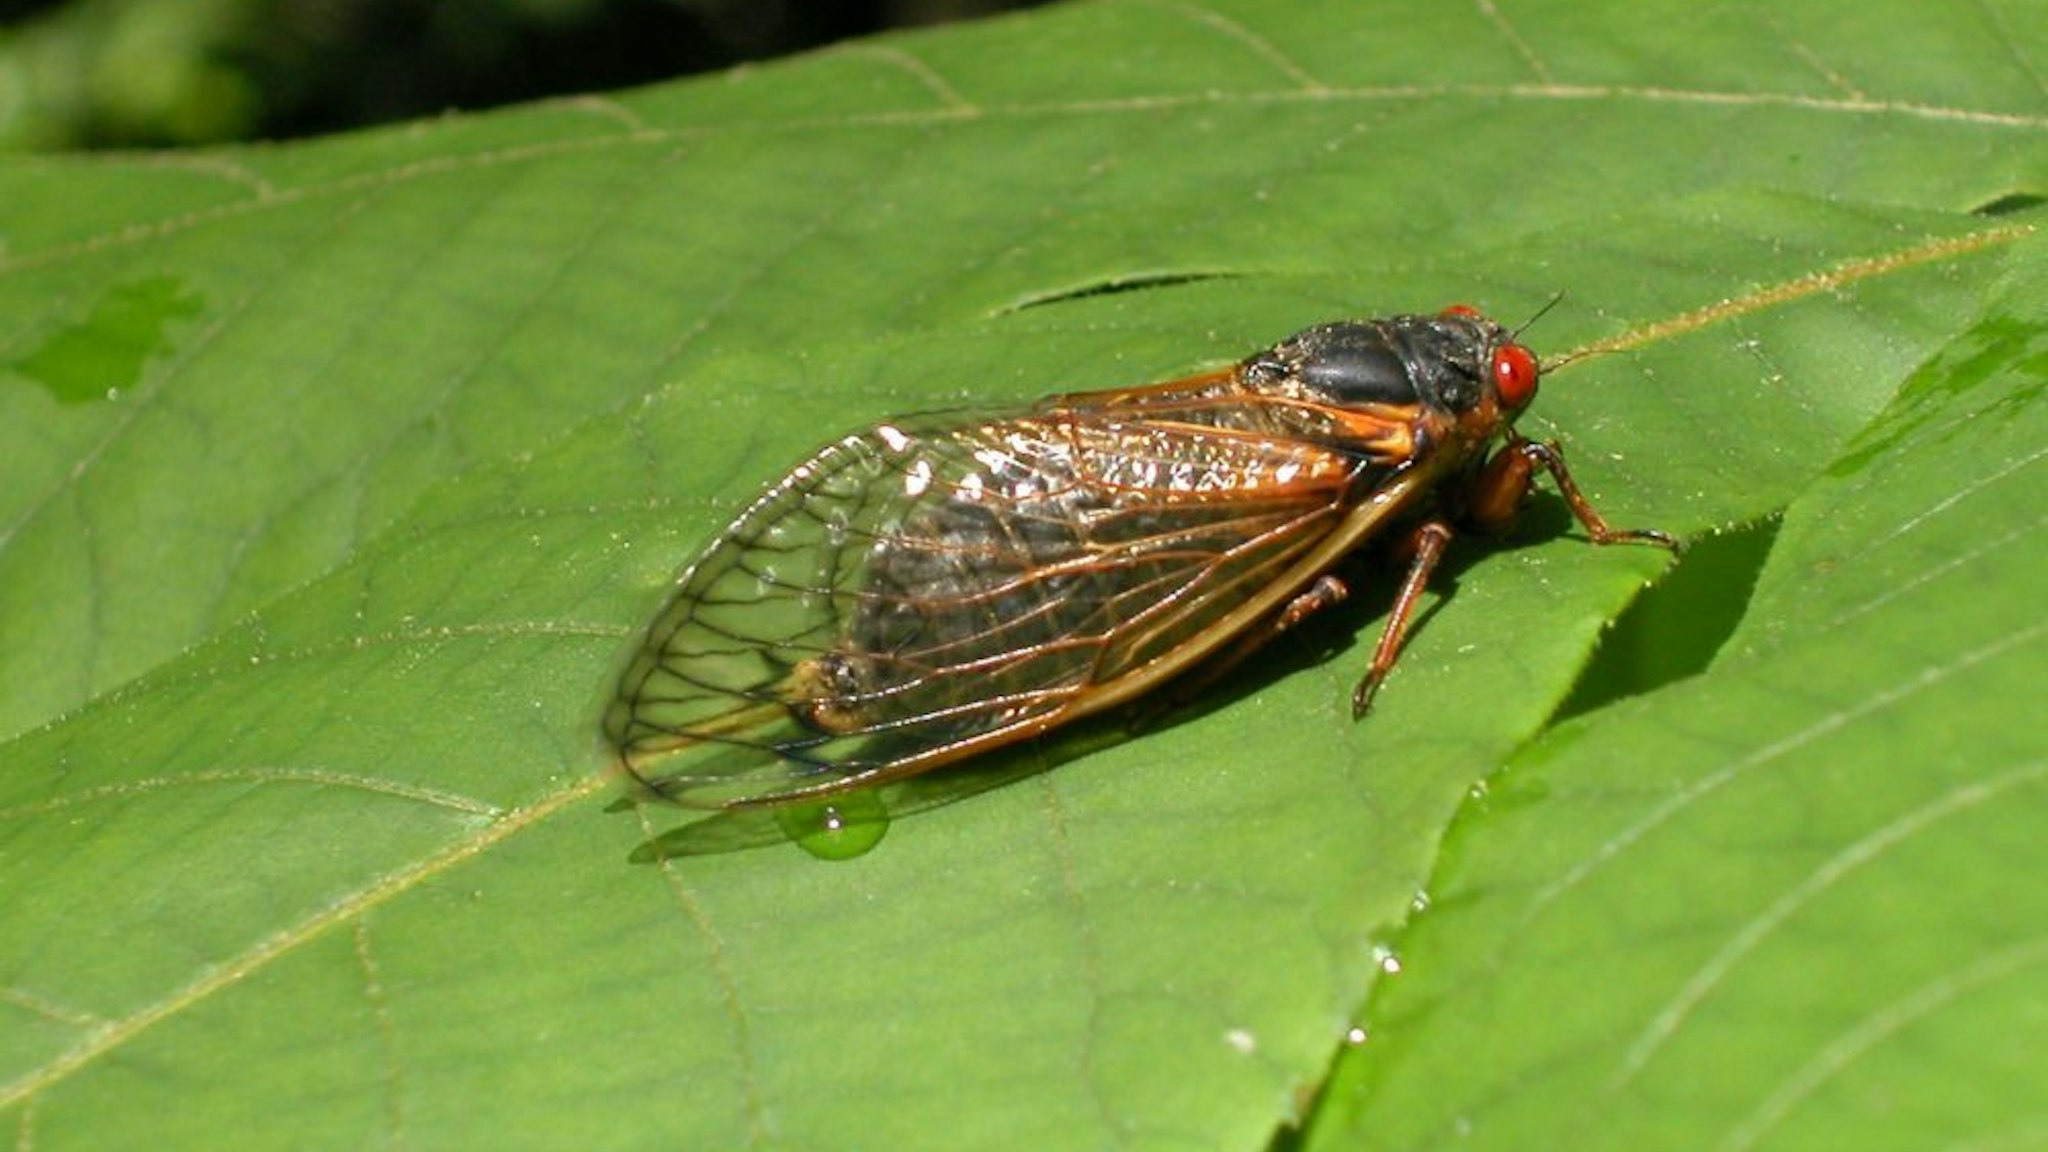 RESON, VA - MAY 16: A newly emerged adult cicada suns itself on a leaf May 16, 2004 in Reston, Virginia. After 17-years living below ground, billions of cicadas belonging to Brood X are beginning to emerge across much of the eastern United States. The cicadas shed their larval skin, spread their wings, and fly out to mate, making a tremendous noise in the process.